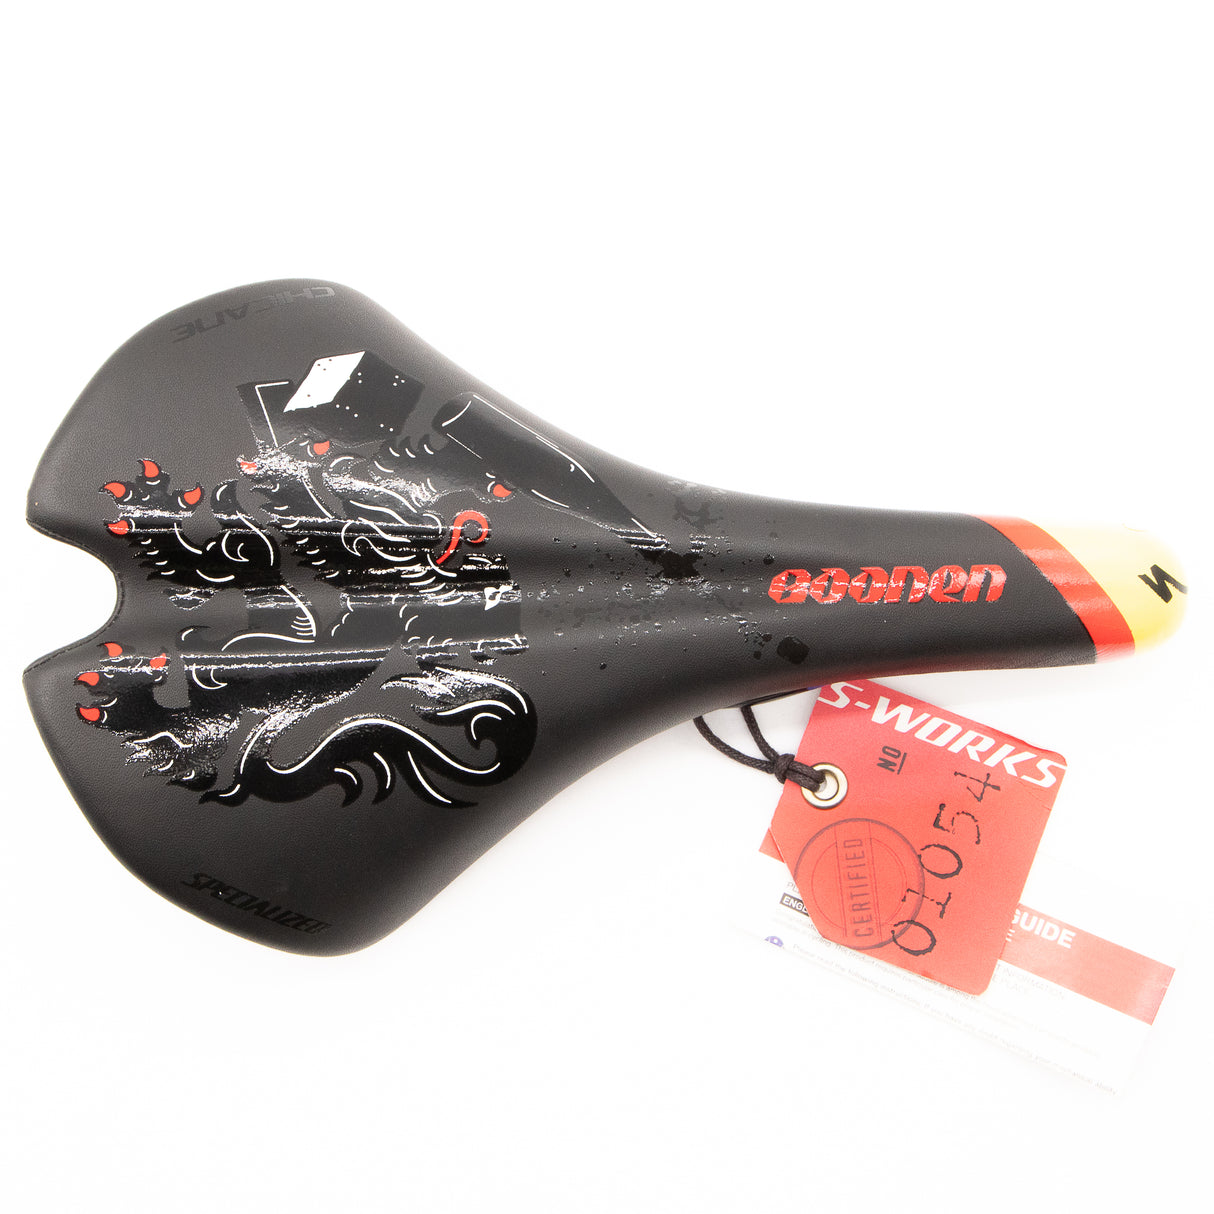 Specialized Chicane Boonen Carbon 168mm Saddle 245g